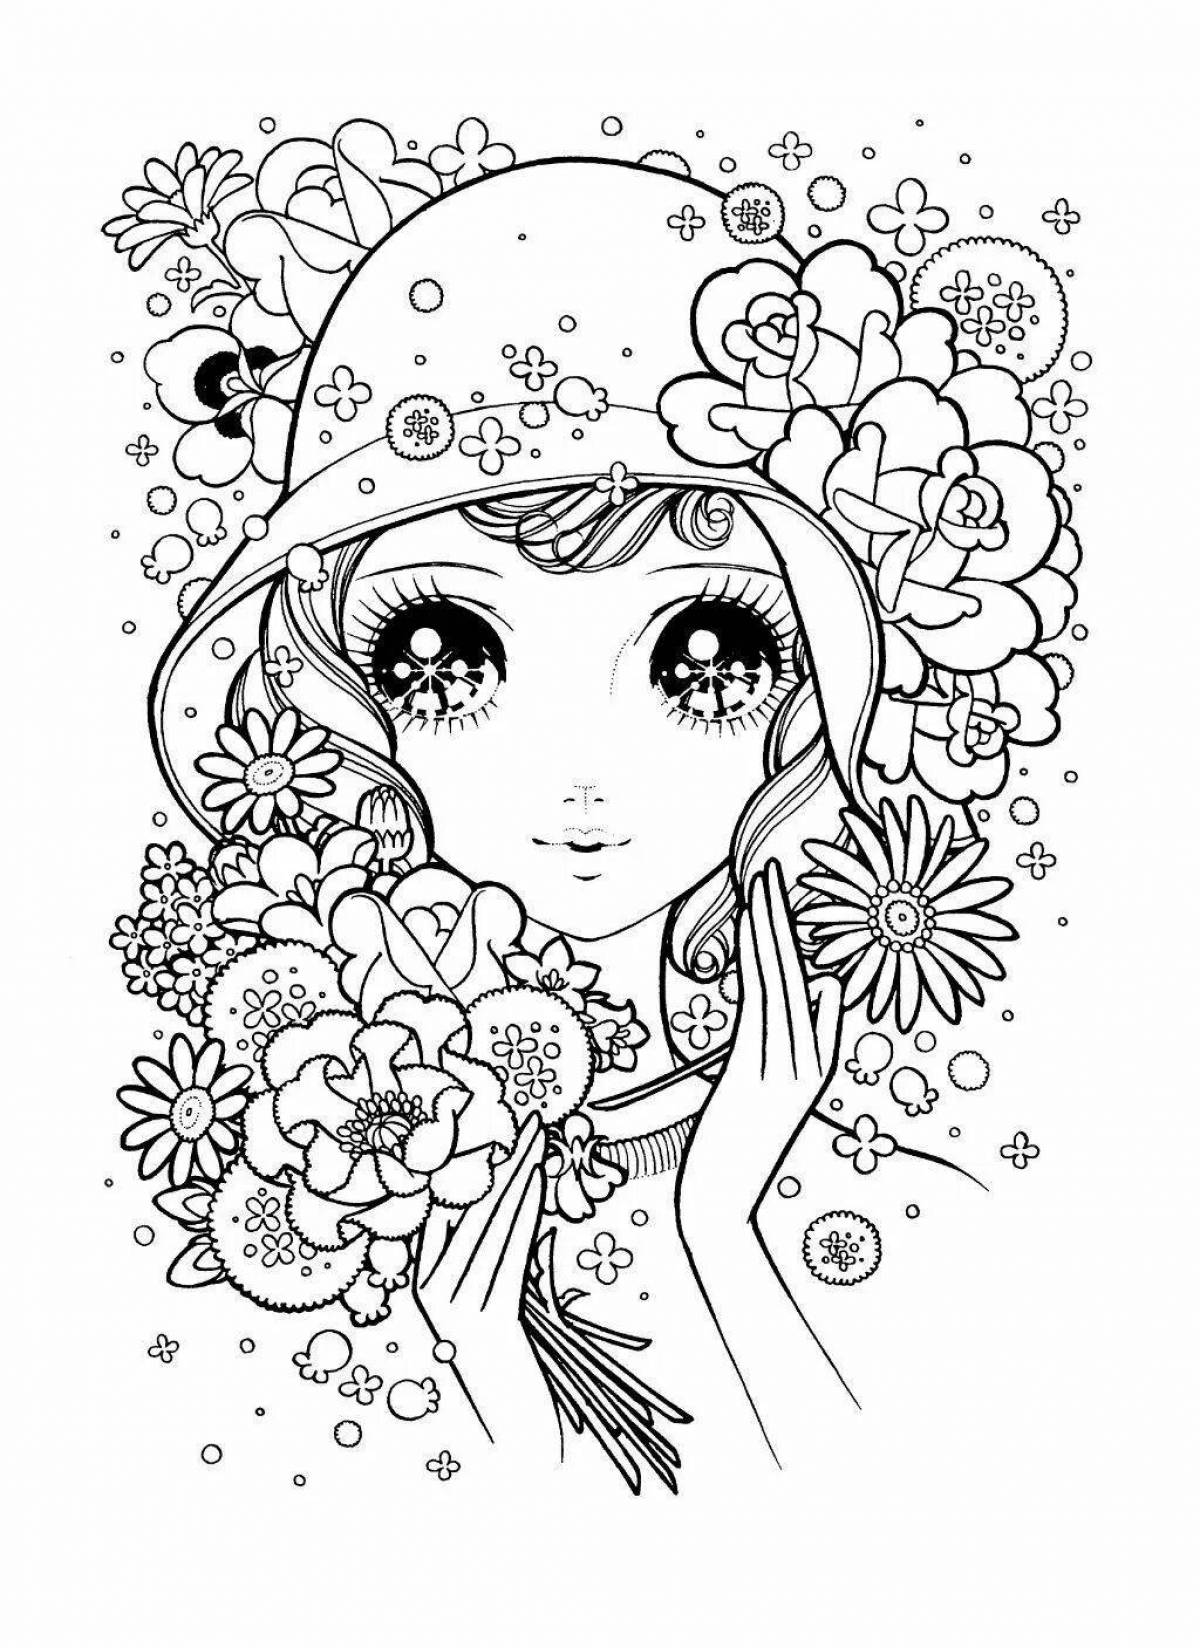 Delightful coloring book for girls 9-8 years old